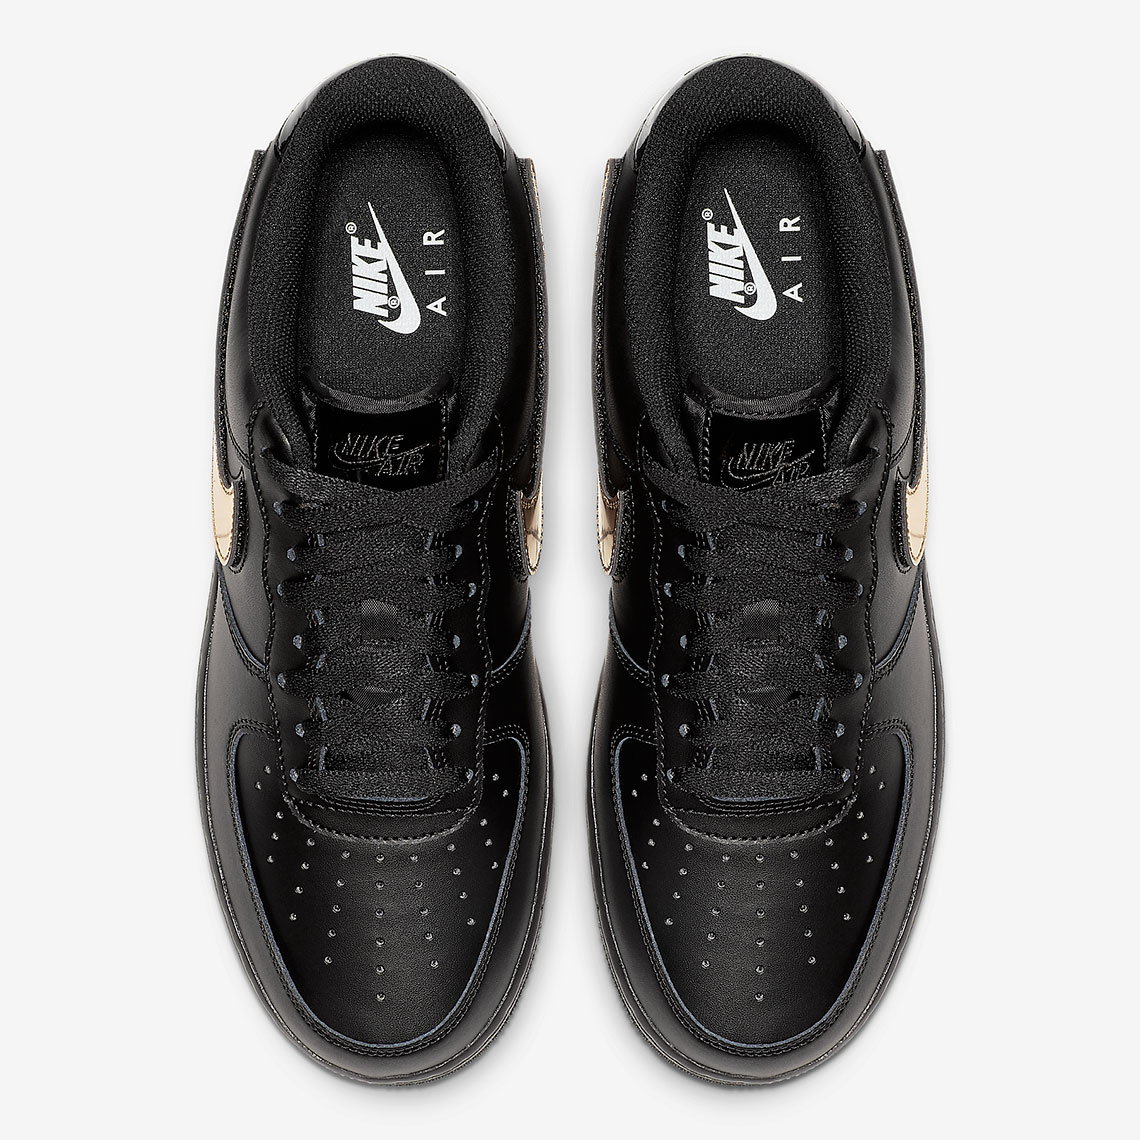 Nike Air Force 1 Blk Gld Ct2252 001 4